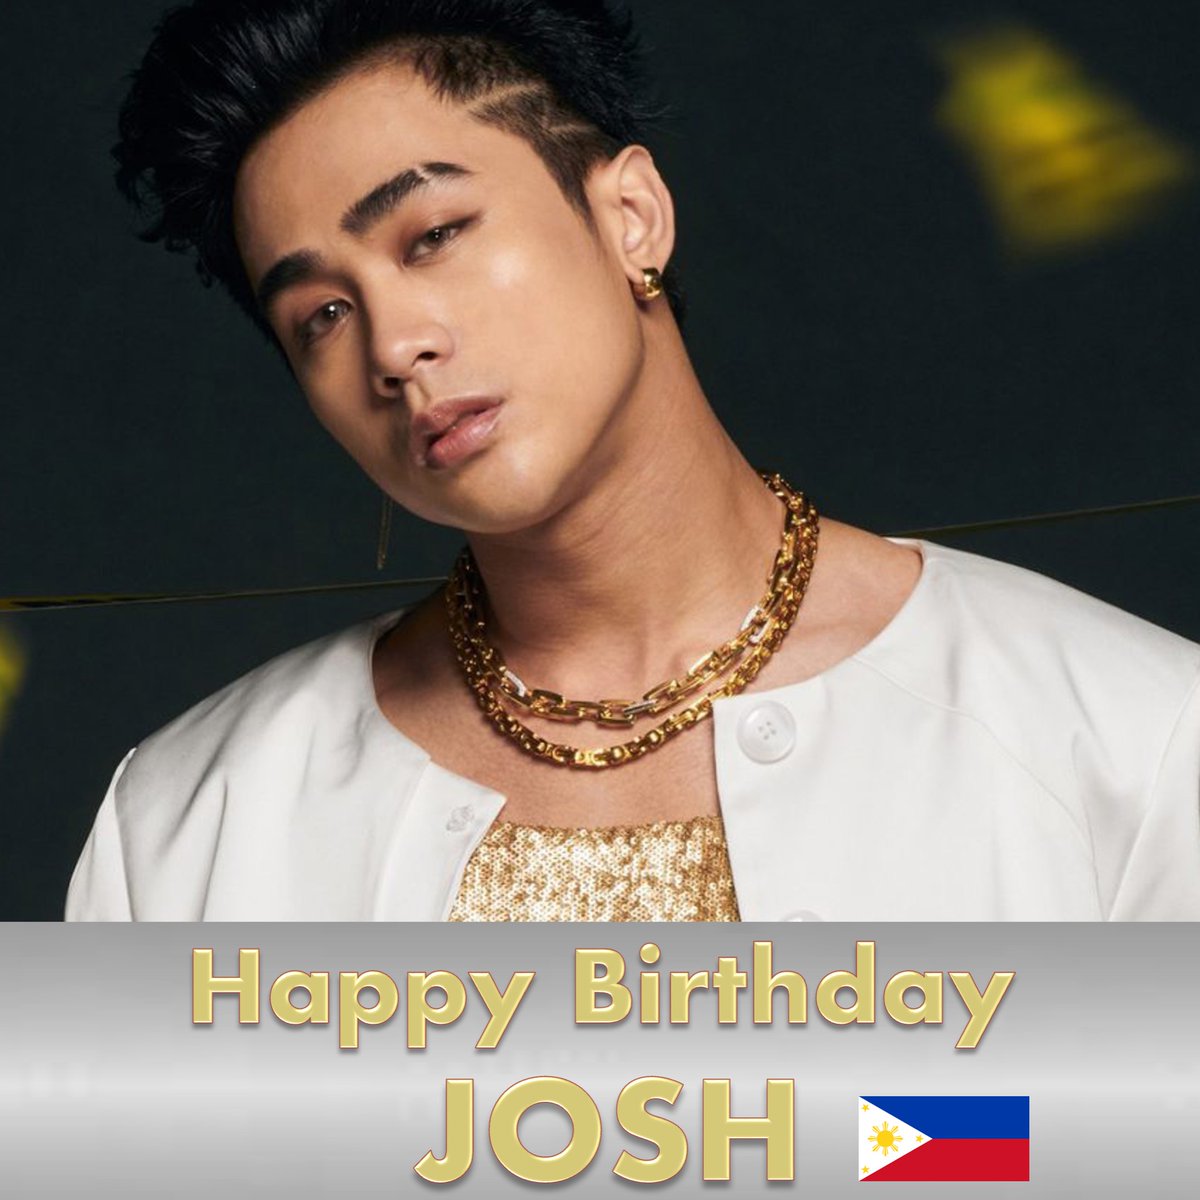 Happy 30th Birthday to #SB19's very handsome and extremely talented lead rapper, Songwriter, Producer and lead dancer #JOSH! 👏🎂🎉🌟👑💙❤️ #KaarawanNiSB19Josh #SB19_JOSH #JoshCullen